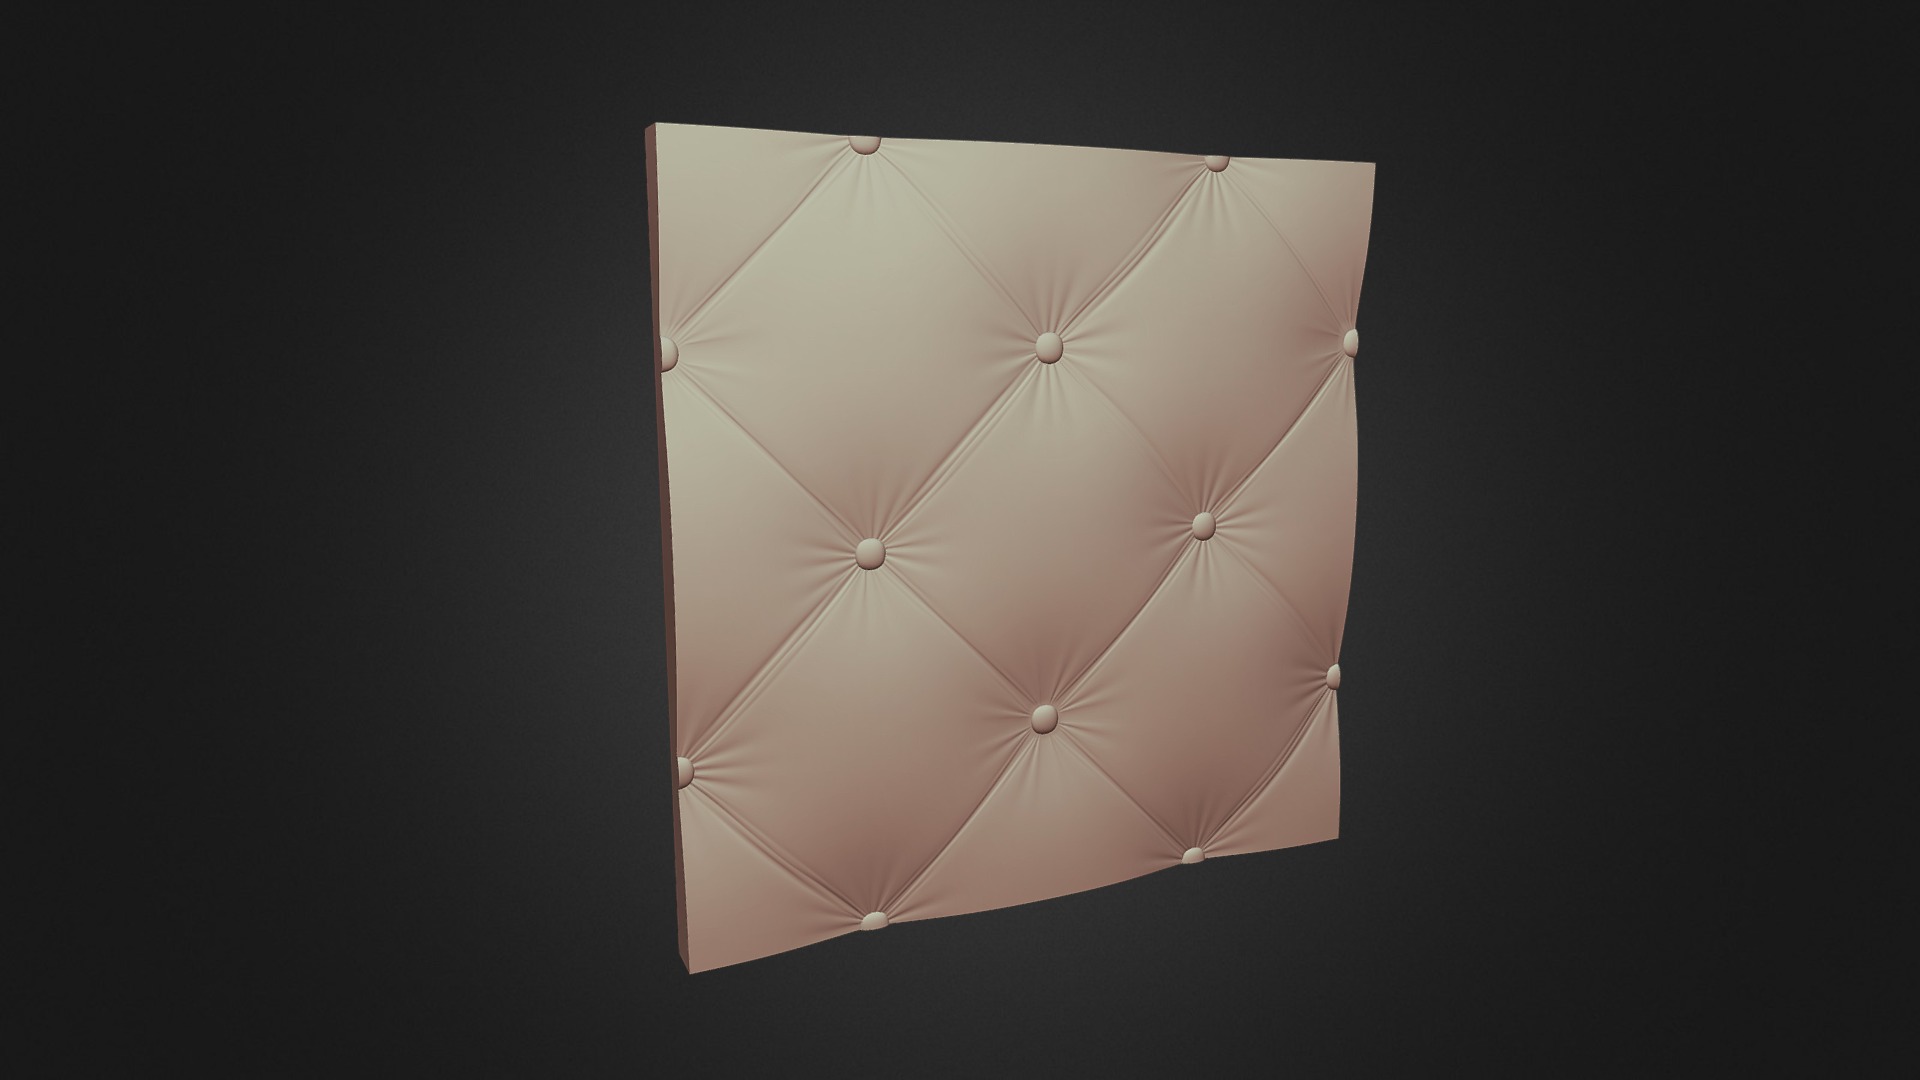 3D model 3D Wall Panel "Capitone" - This is a 3D model of the 3D Wall Panel "Capitone". The 3D model is about a white paper fan.